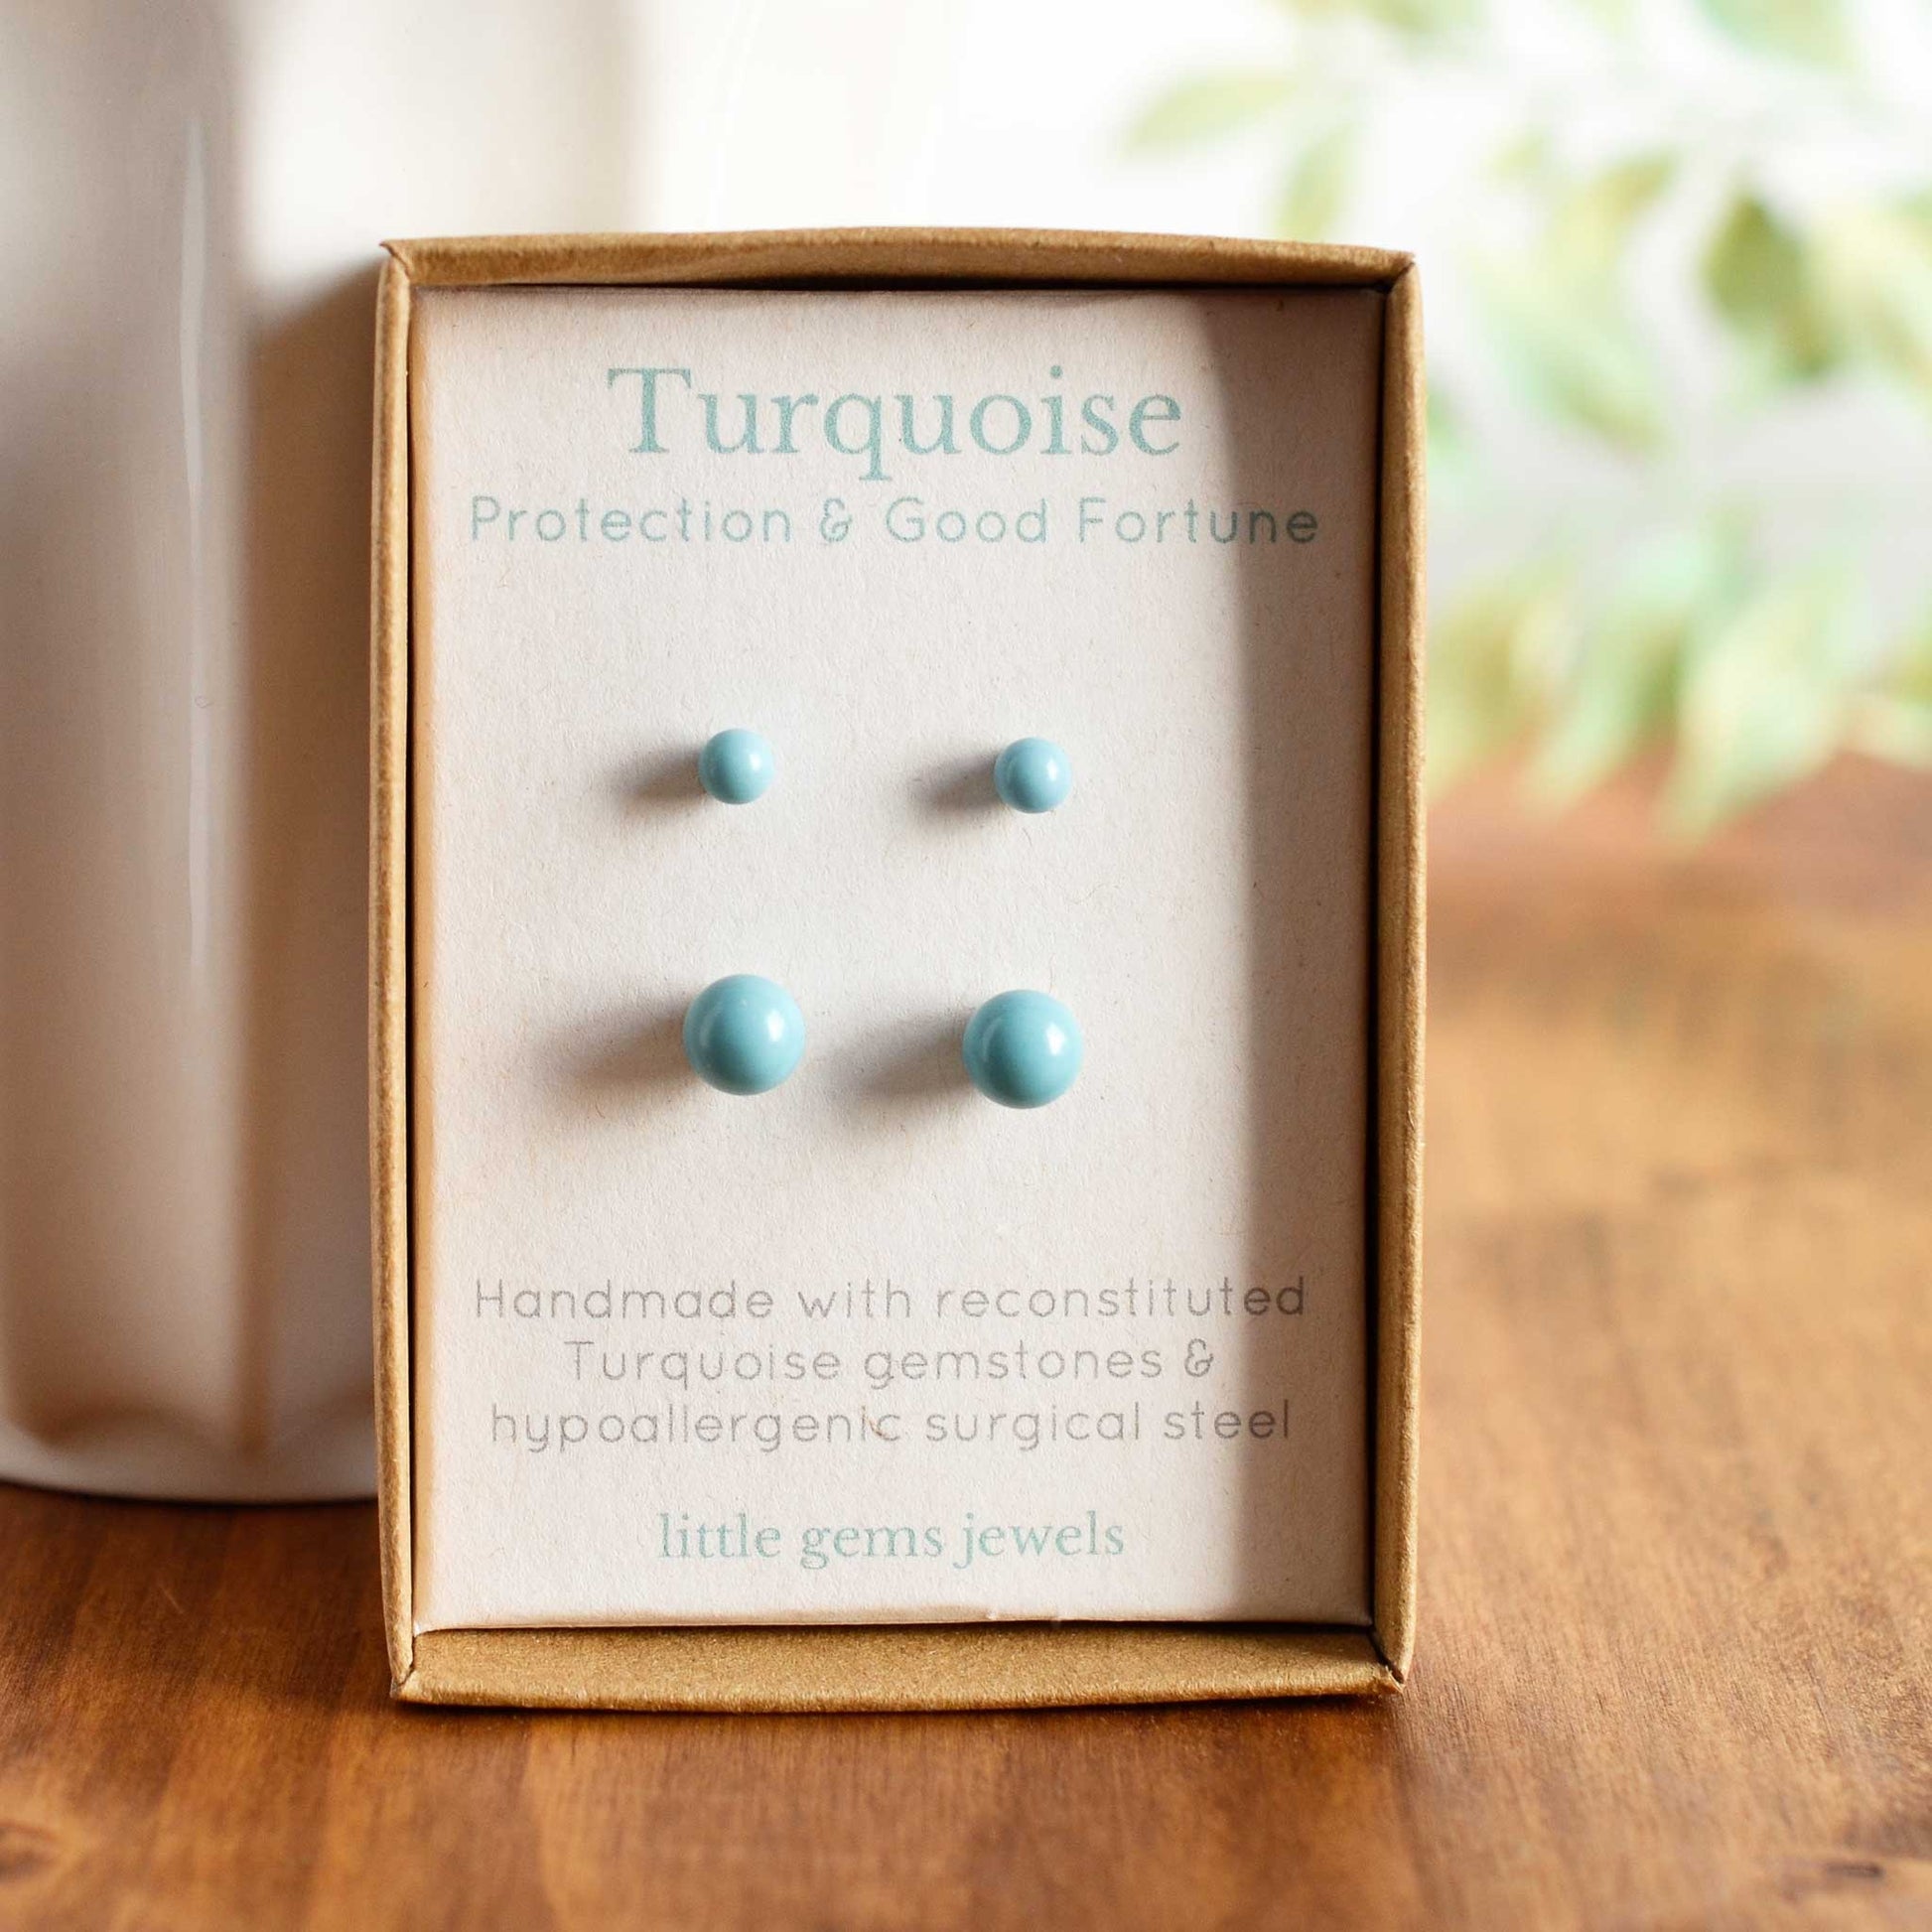 4mm & 6mm Turquoise gemstone stud earrings in eco friendly gift box